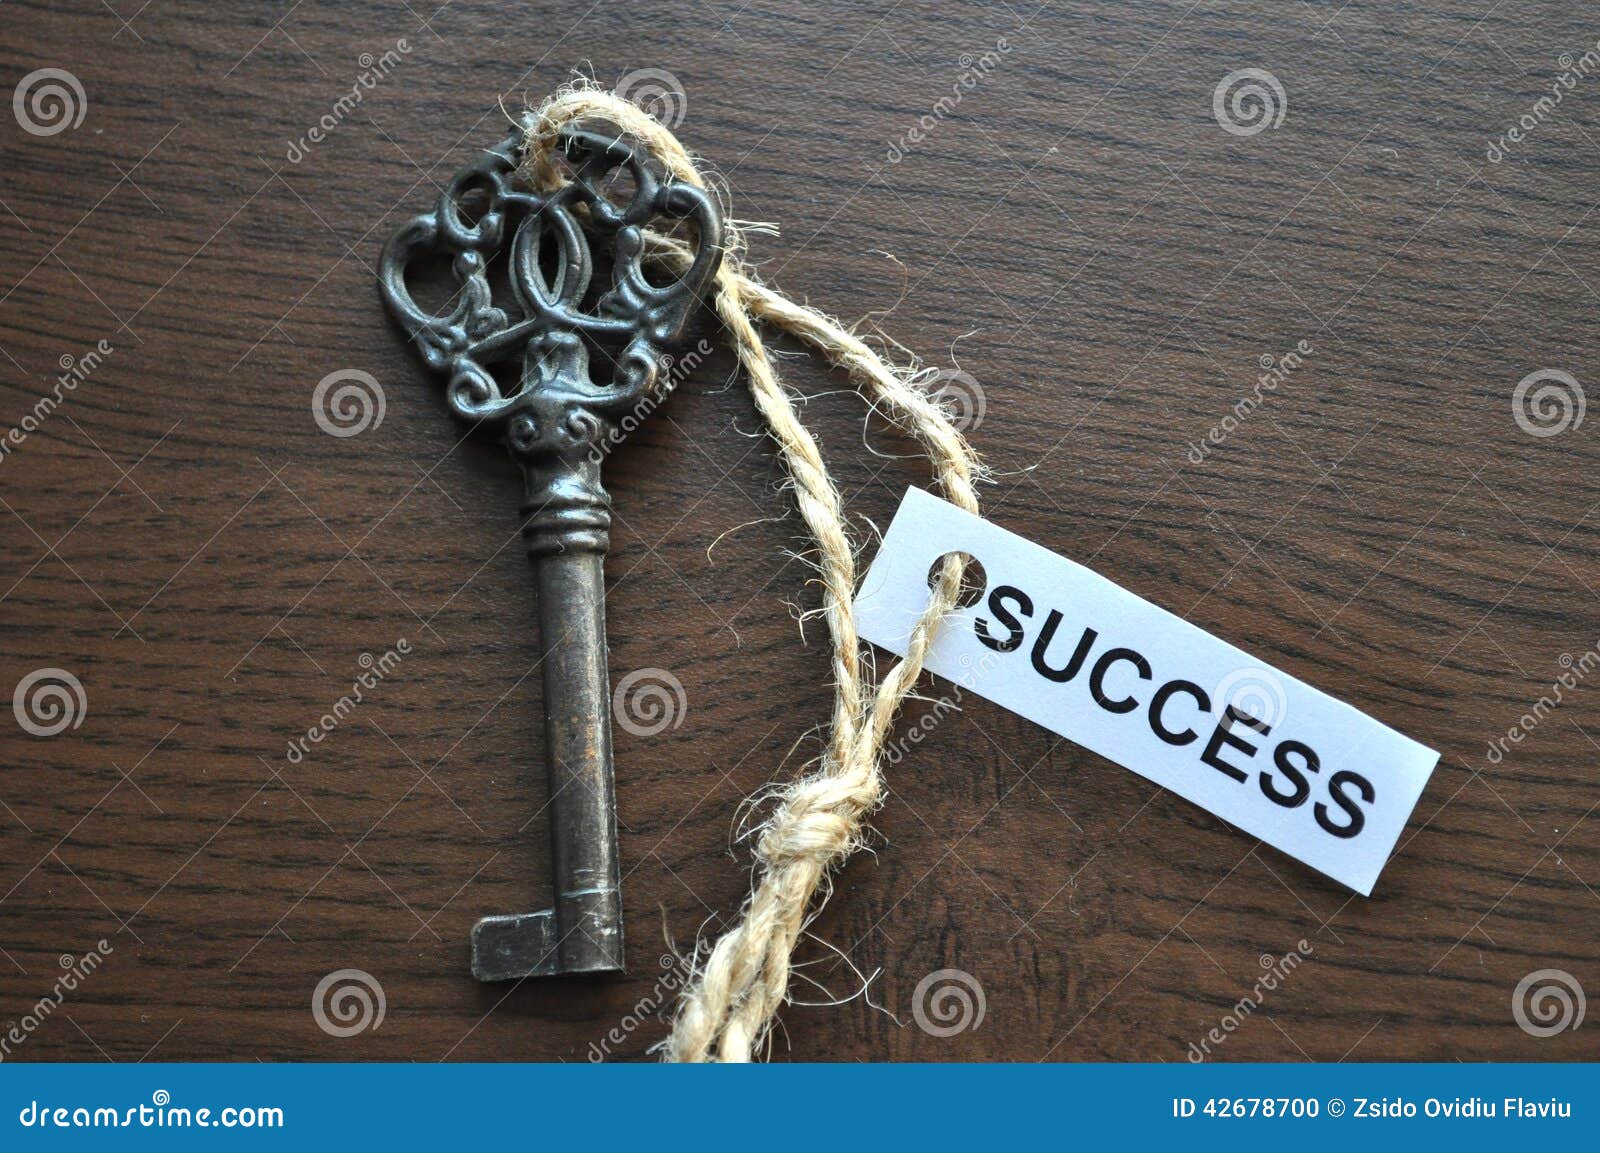 the key to succes